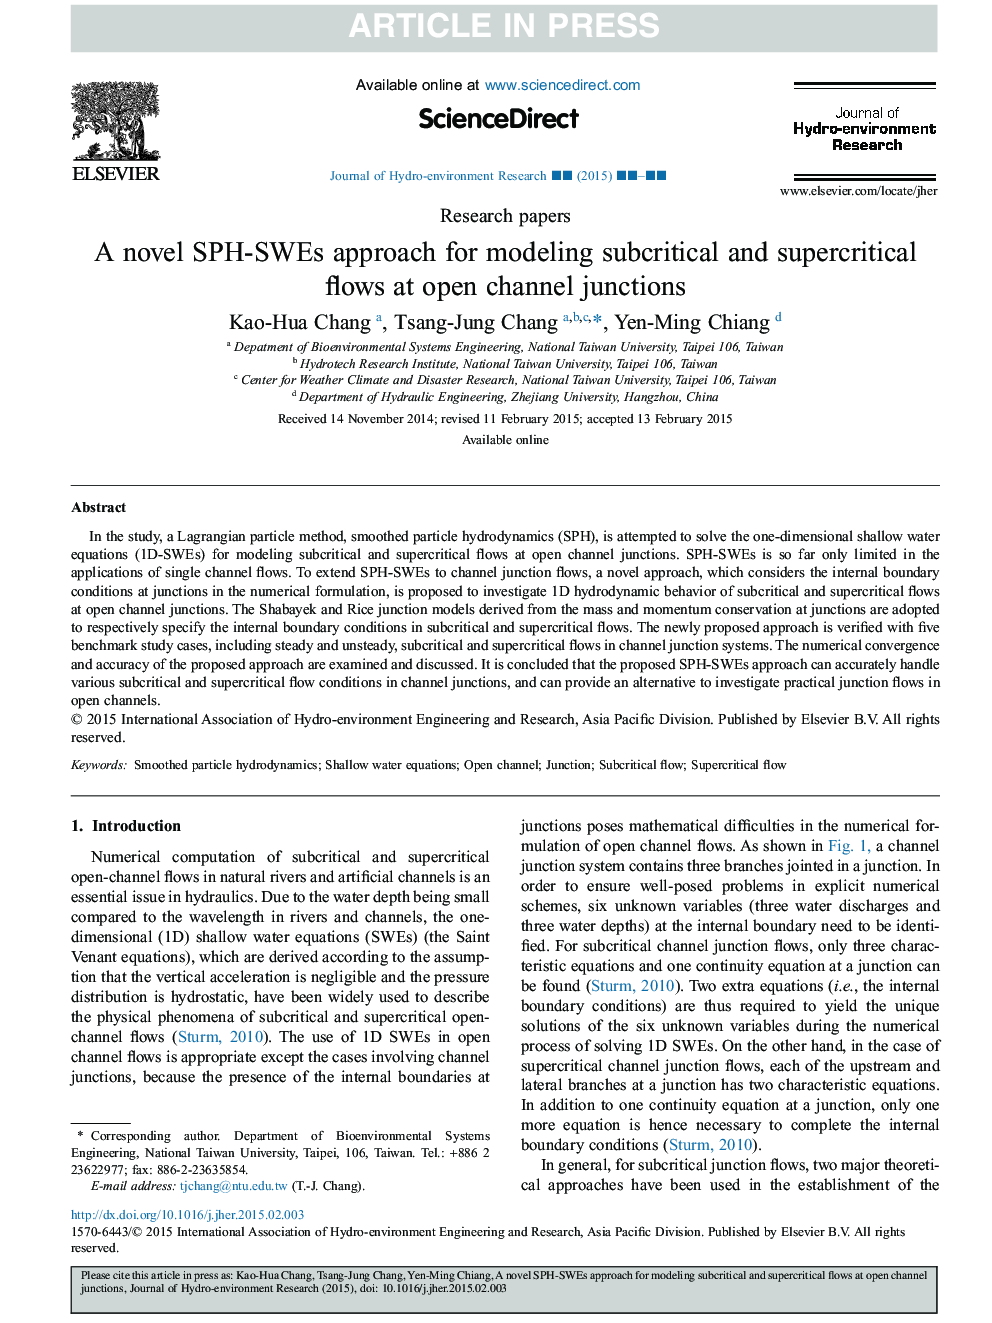 A novel SPH-SWEs approach for modeling subcritical and supercritical flows at open channel junctions